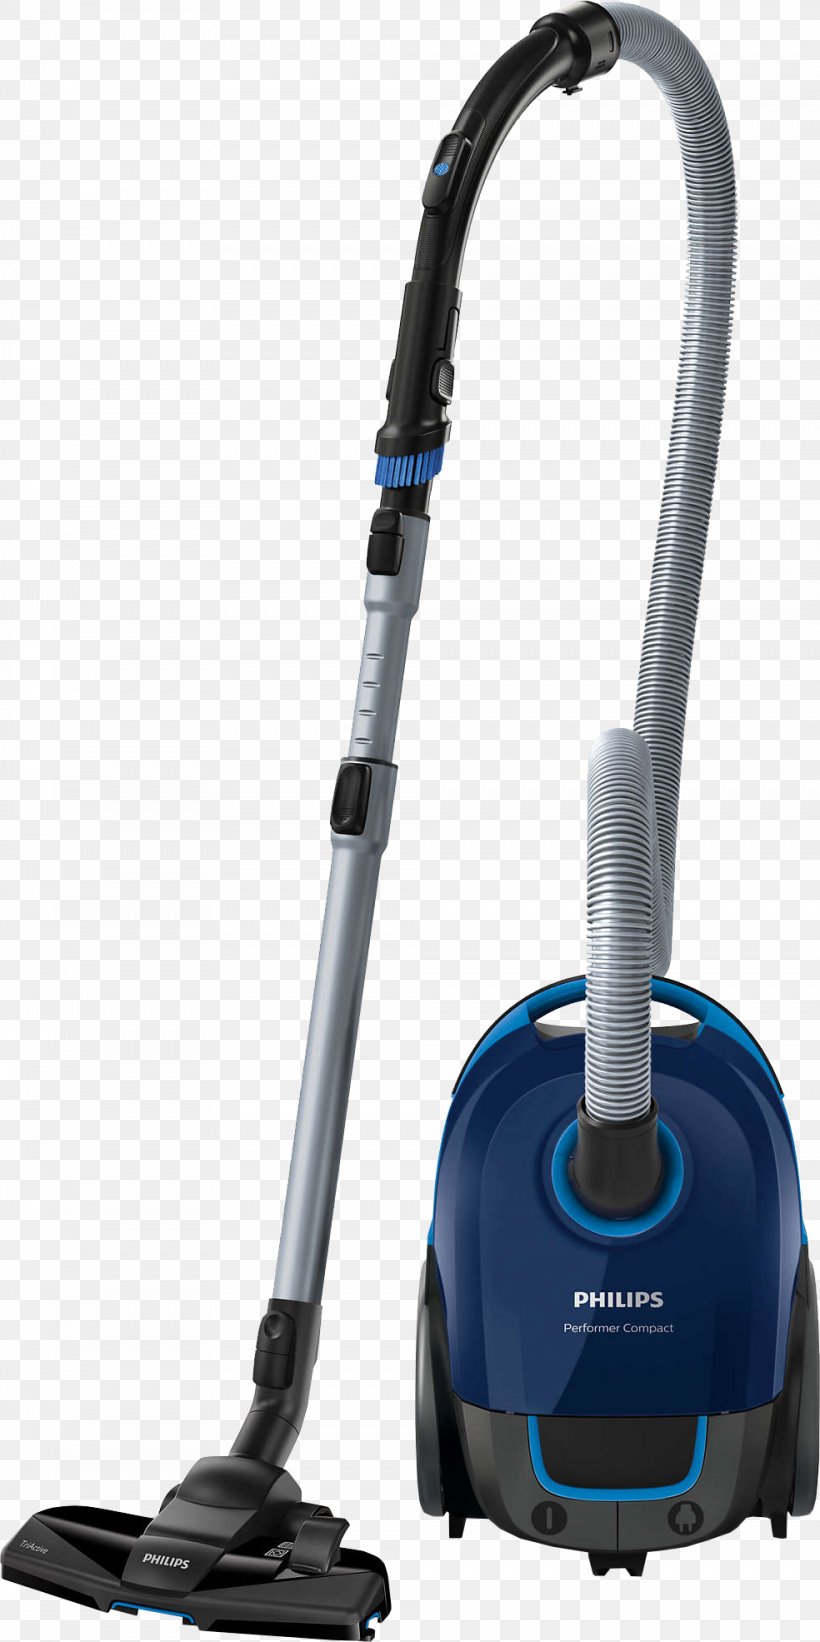 Vacuum Cleaner Philips Performer Compact Philips PowerLife FC8322 Home Appliance, PNG, 984x1971px, Vacuum Cleaner, Cleaner, Cleaning, Hardware, Home Appliance Download Free